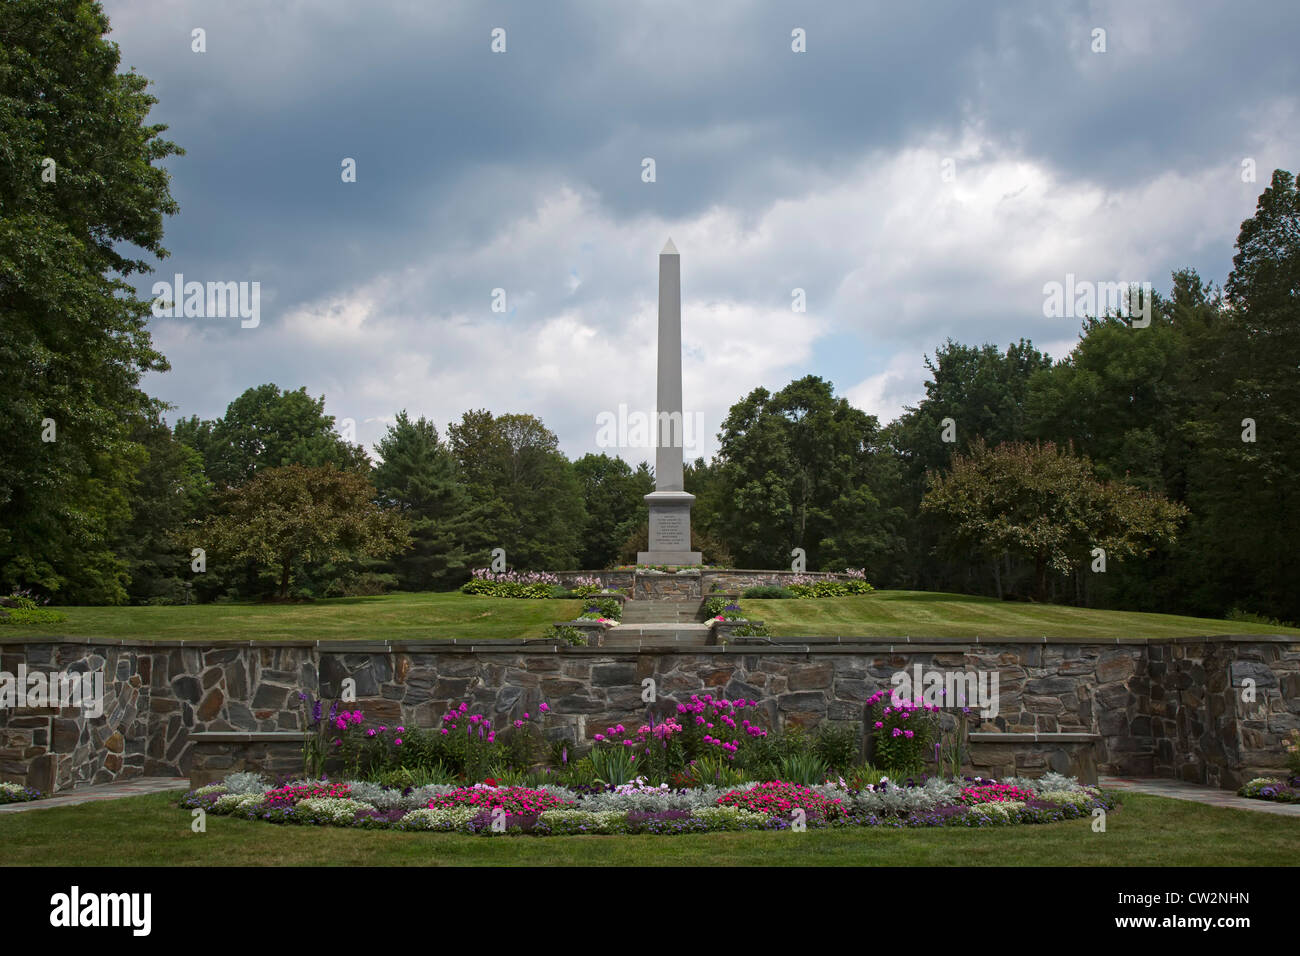 South Royalton, Vermont - The Joseph Smith Memorial at the birthplace of the founder of the Mormon church. Stock Photo